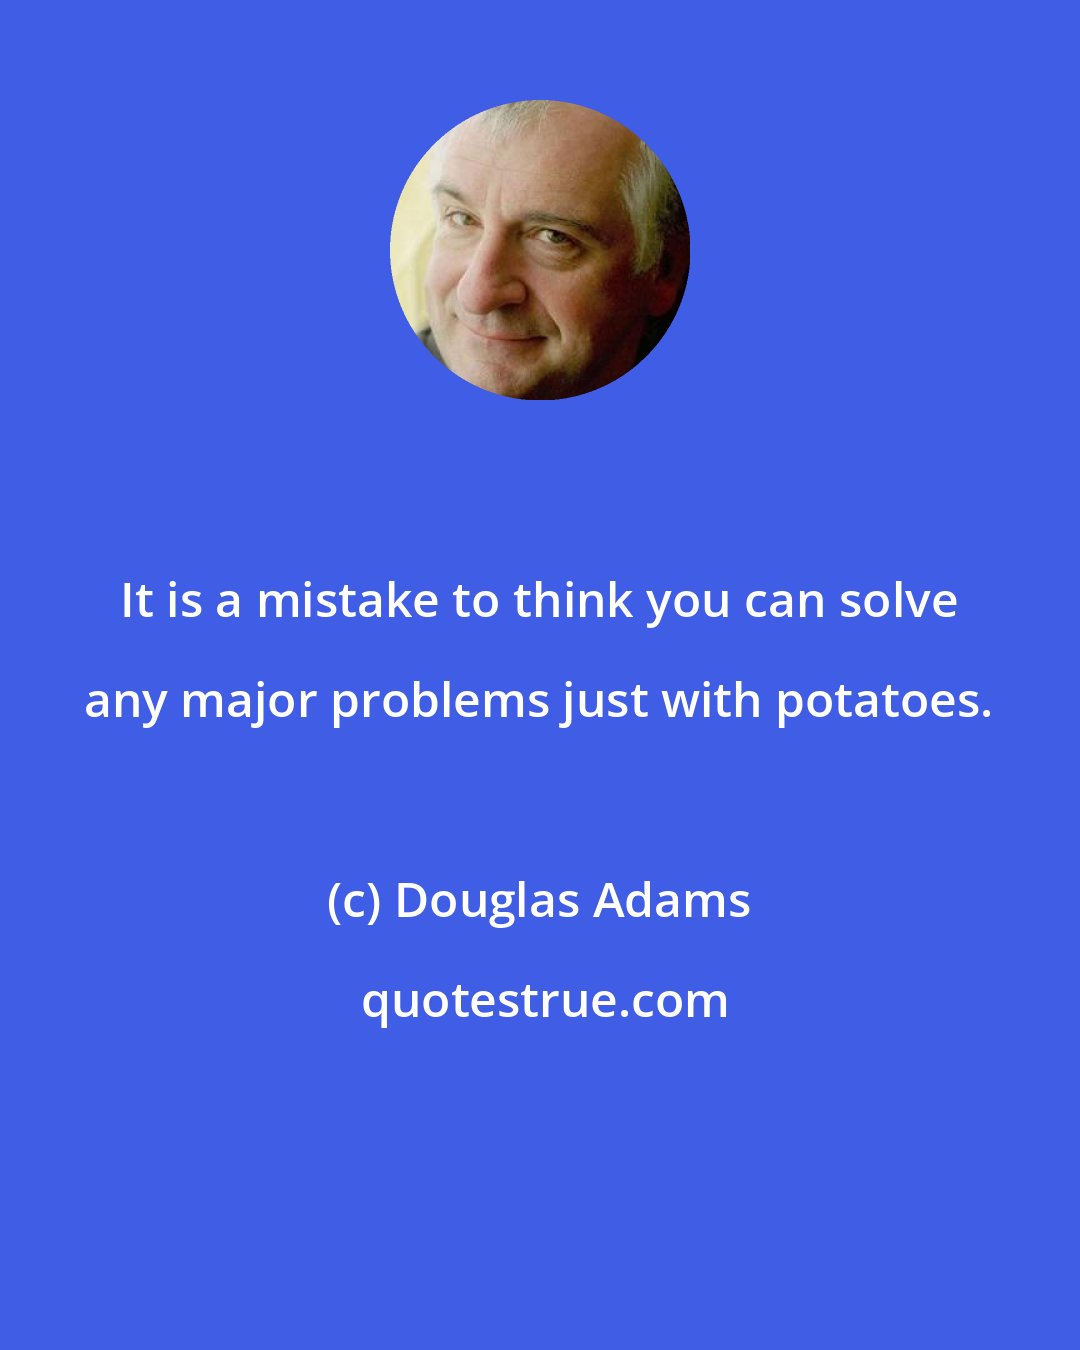 Douglas Adams: It is a mistake to think you can solve any major problems just with potatoes.